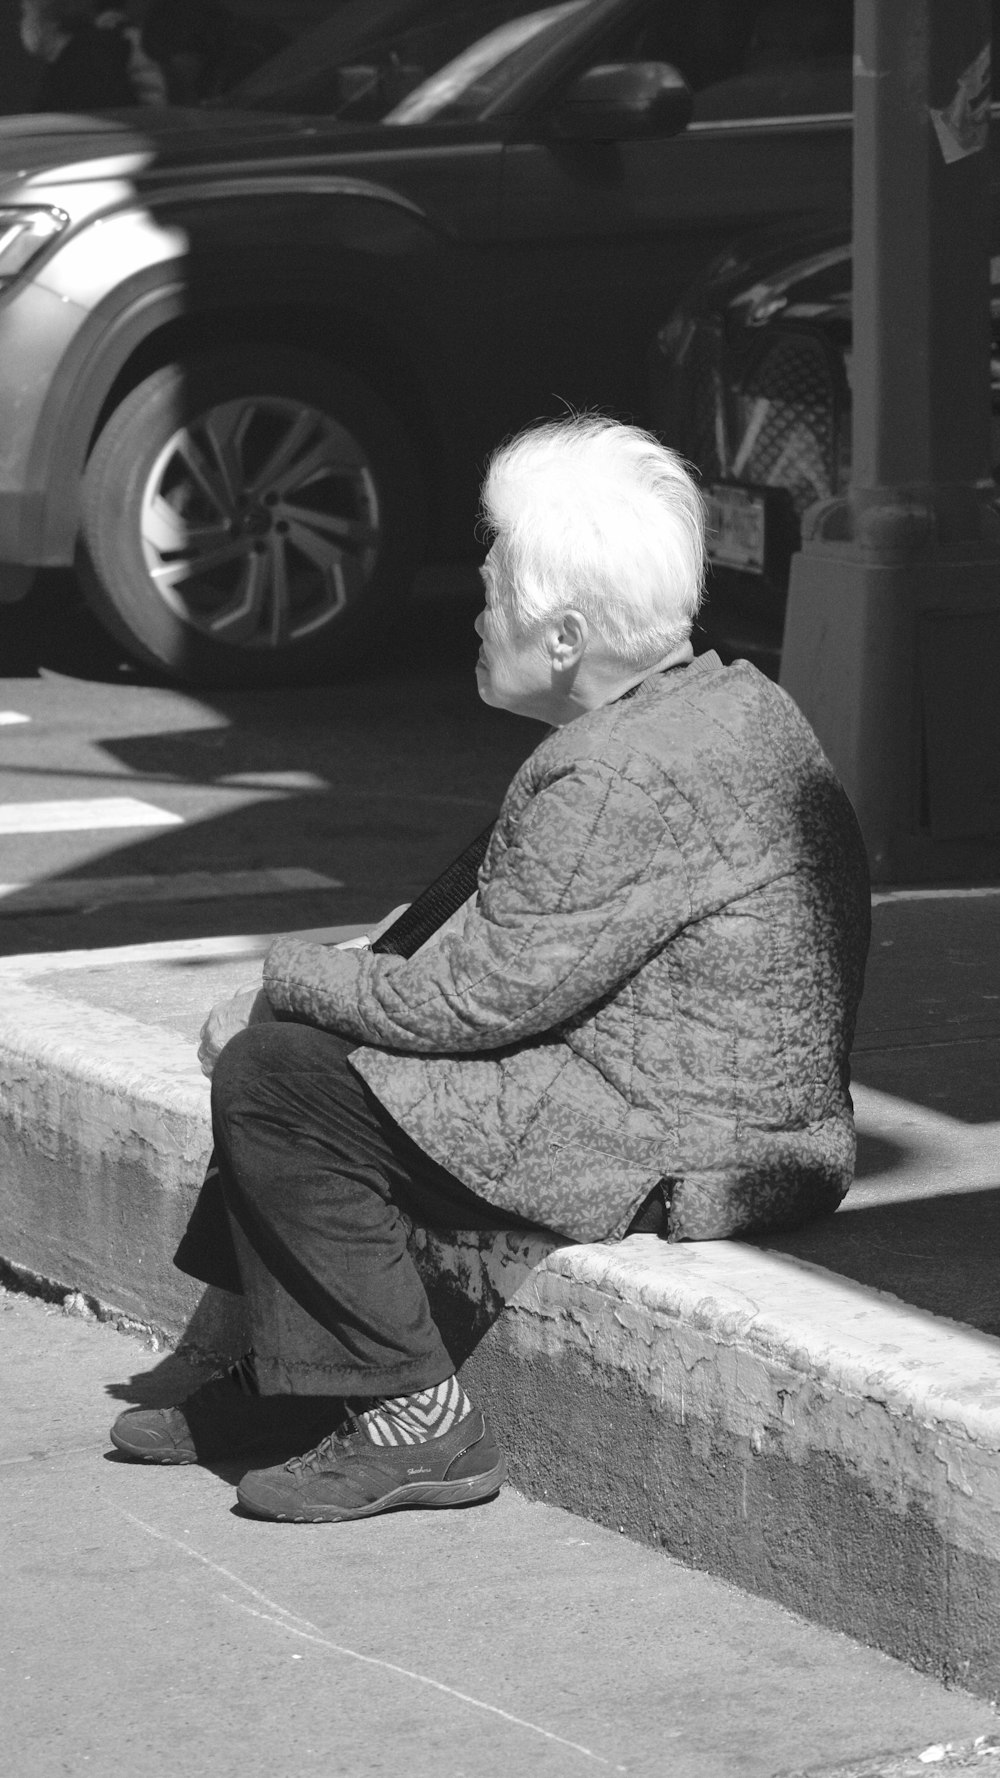 a black and white photo of a person sitting on a curb